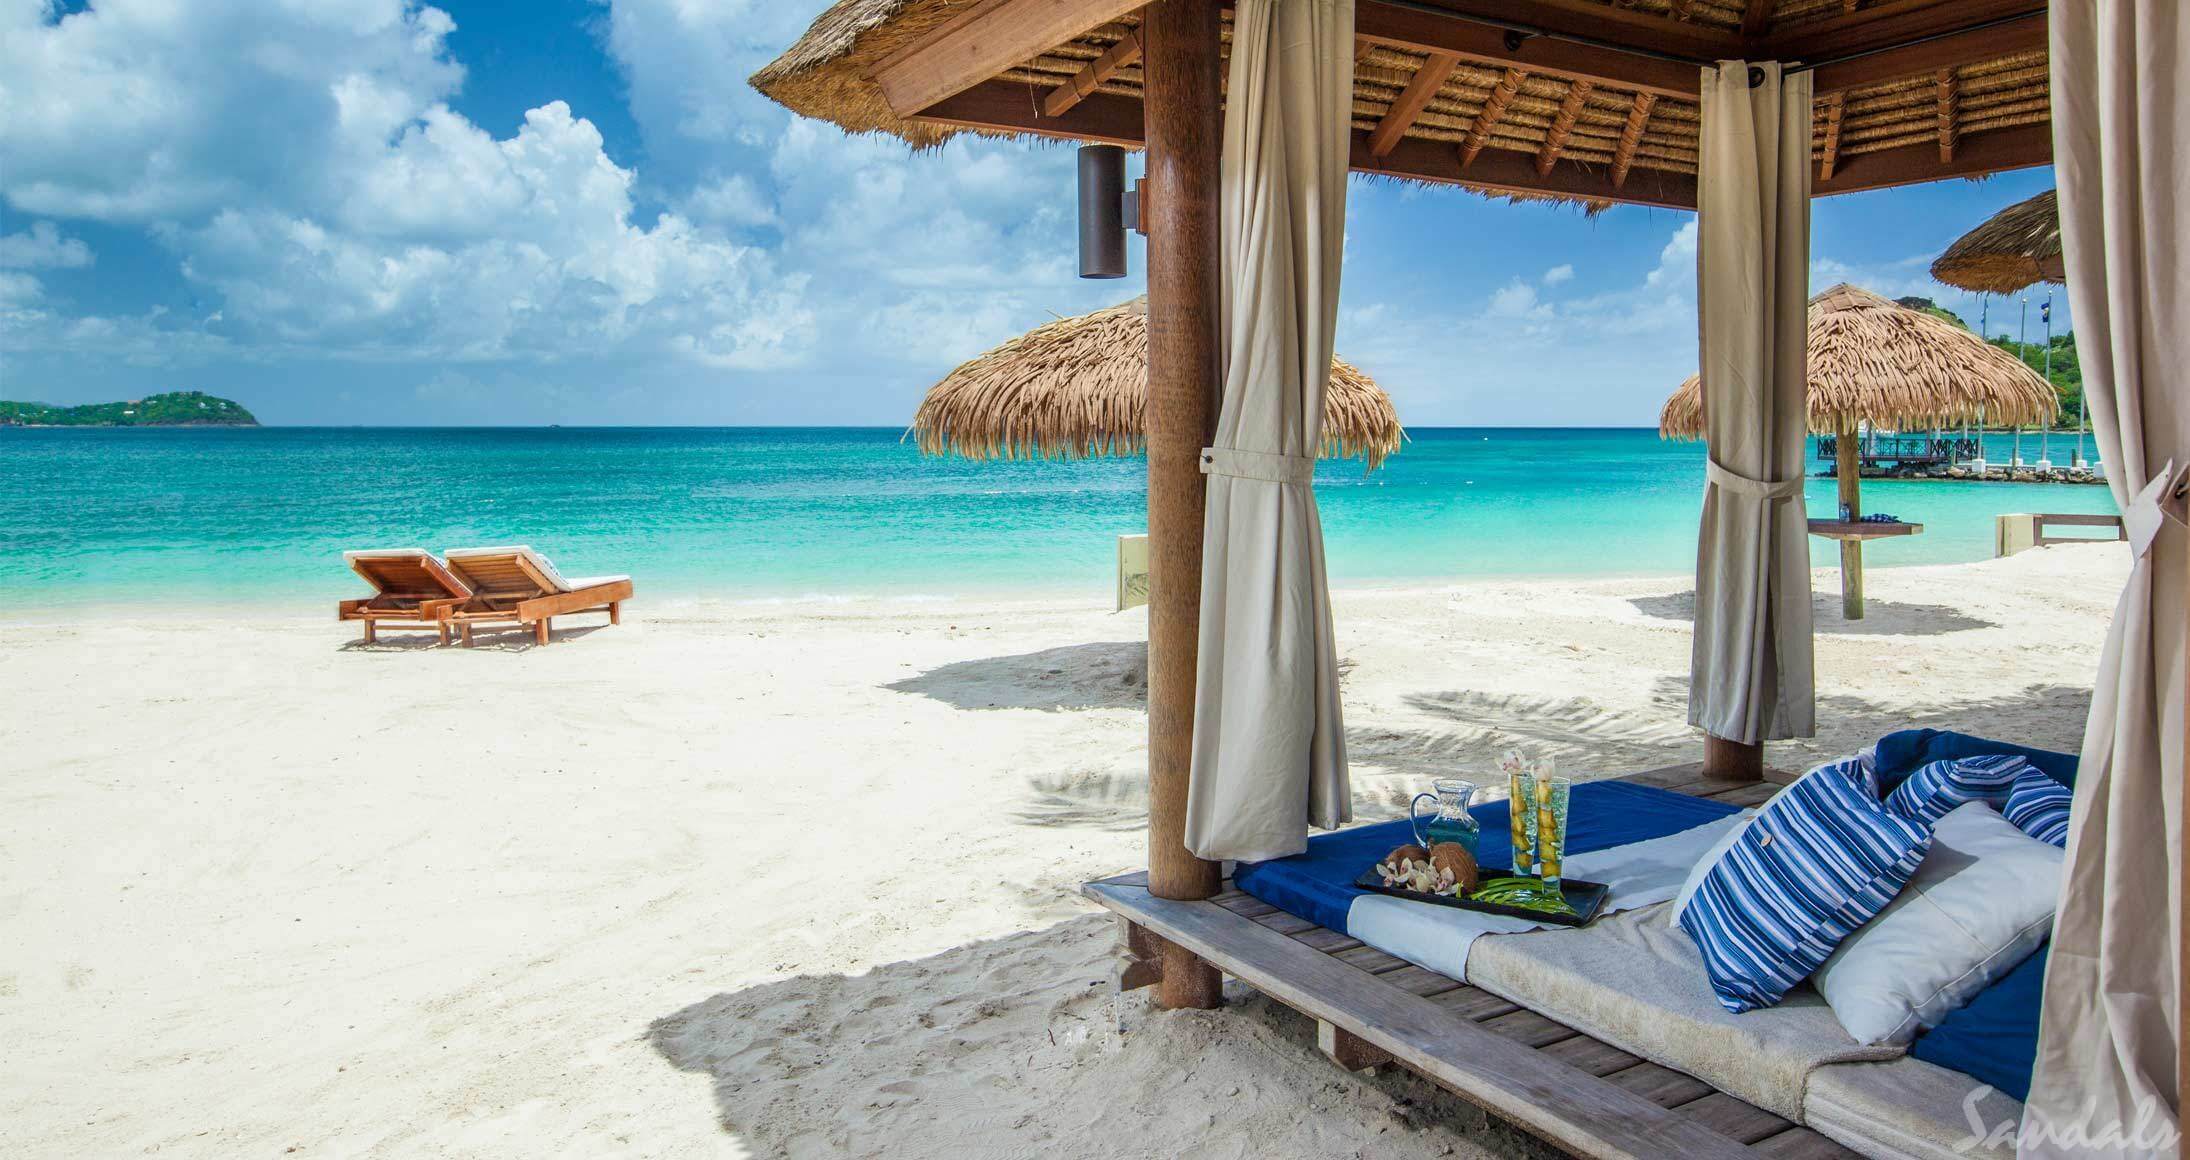 Sandals Resort Deals: How to Save on Your Next Luxury Vacation - Exploring  Caribbean